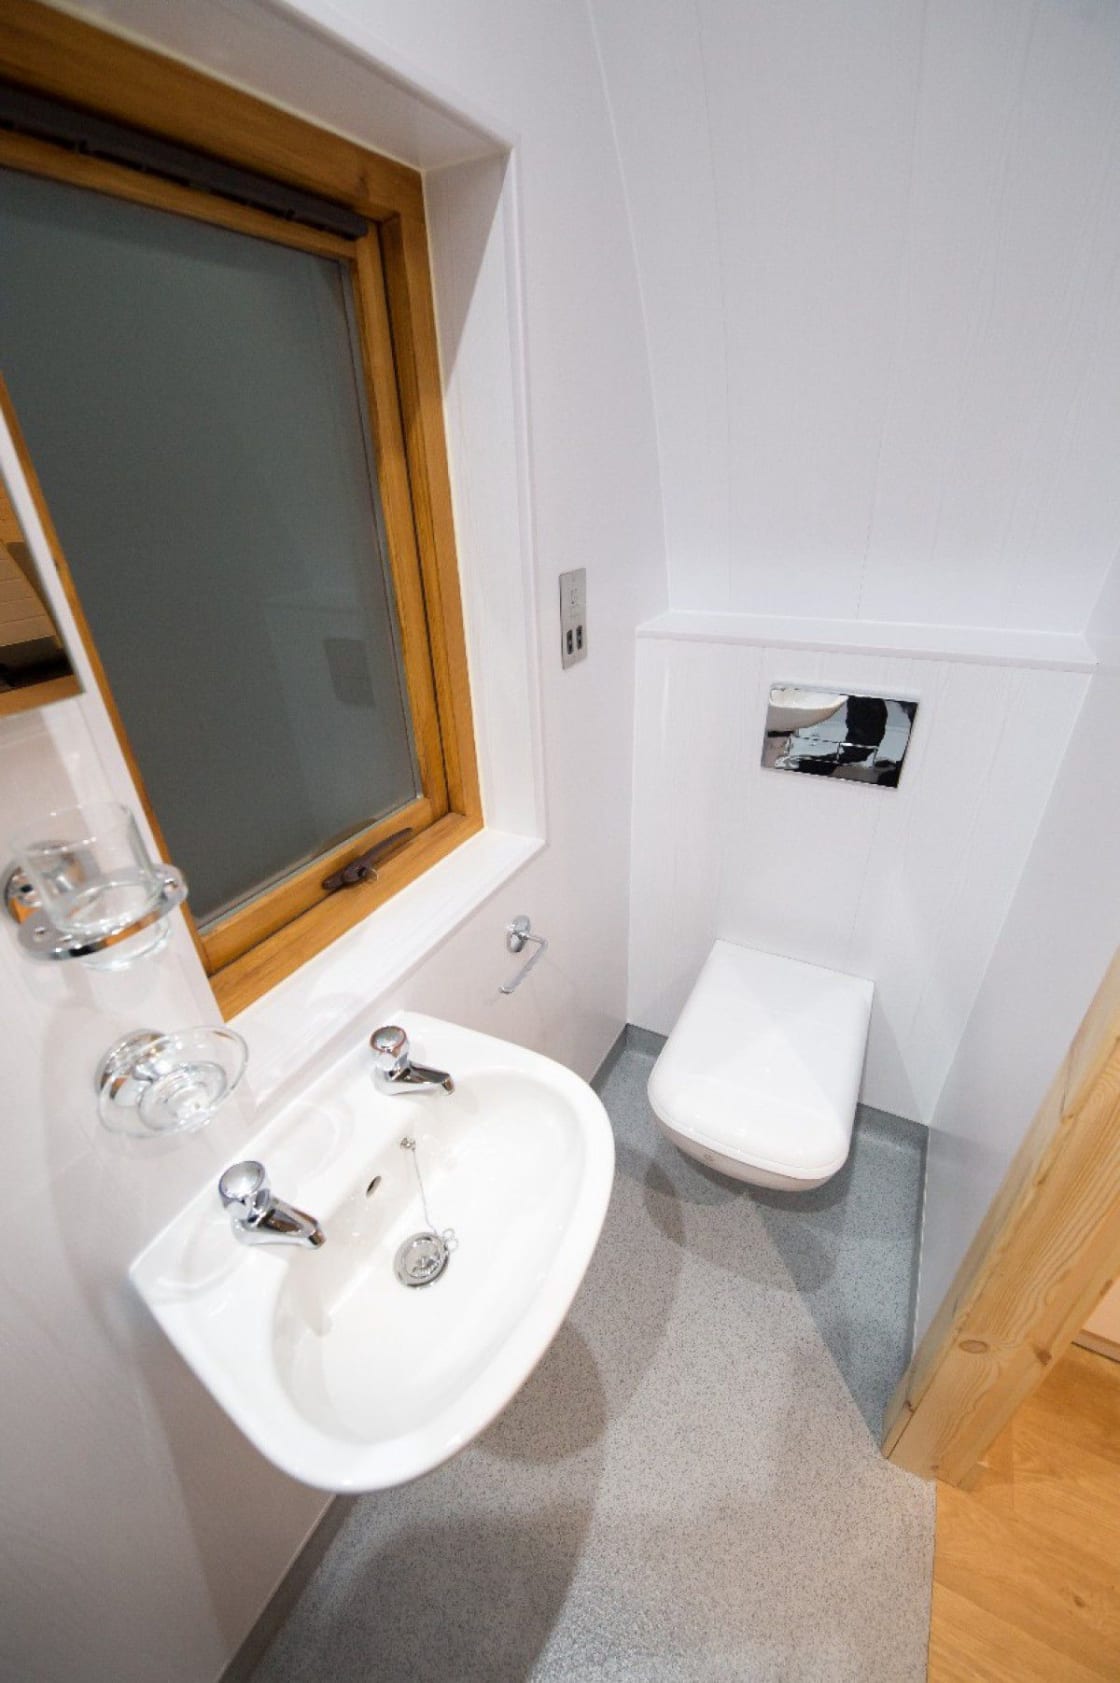 Bathroom with basin and toilet